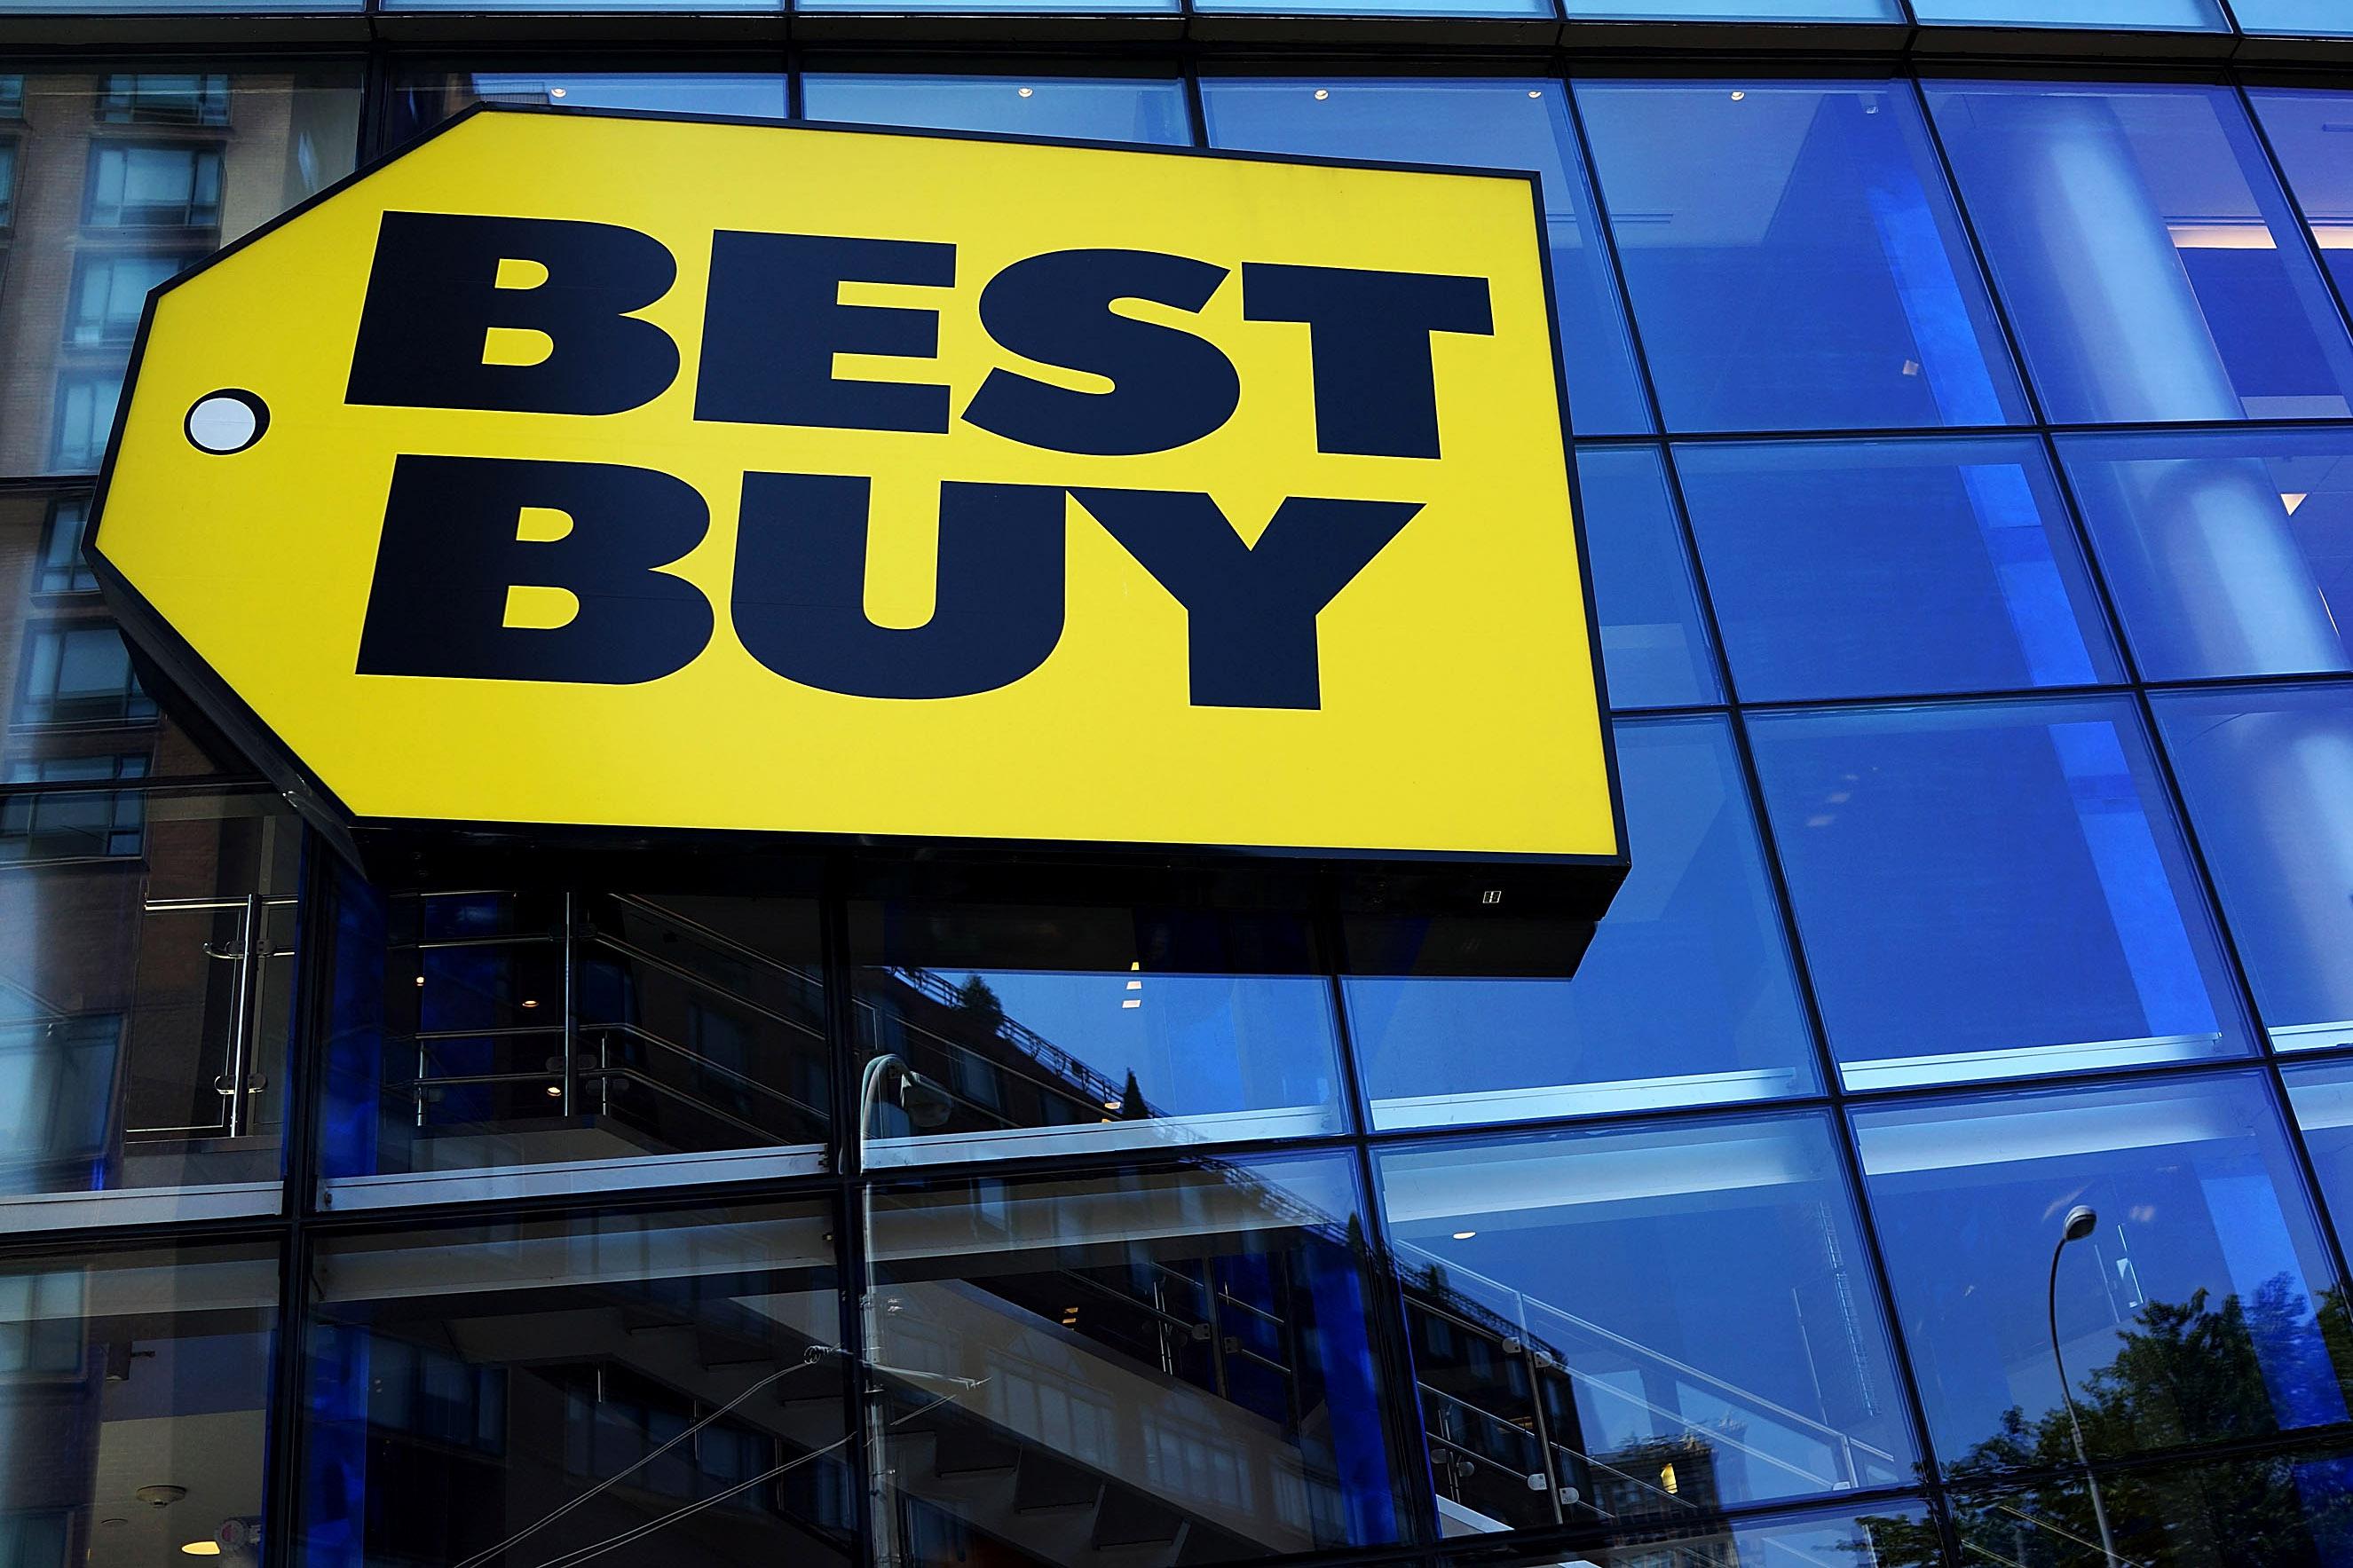 100 Best Buy Retail Locations to Begin Selling 3D Systems’ Cube 3D